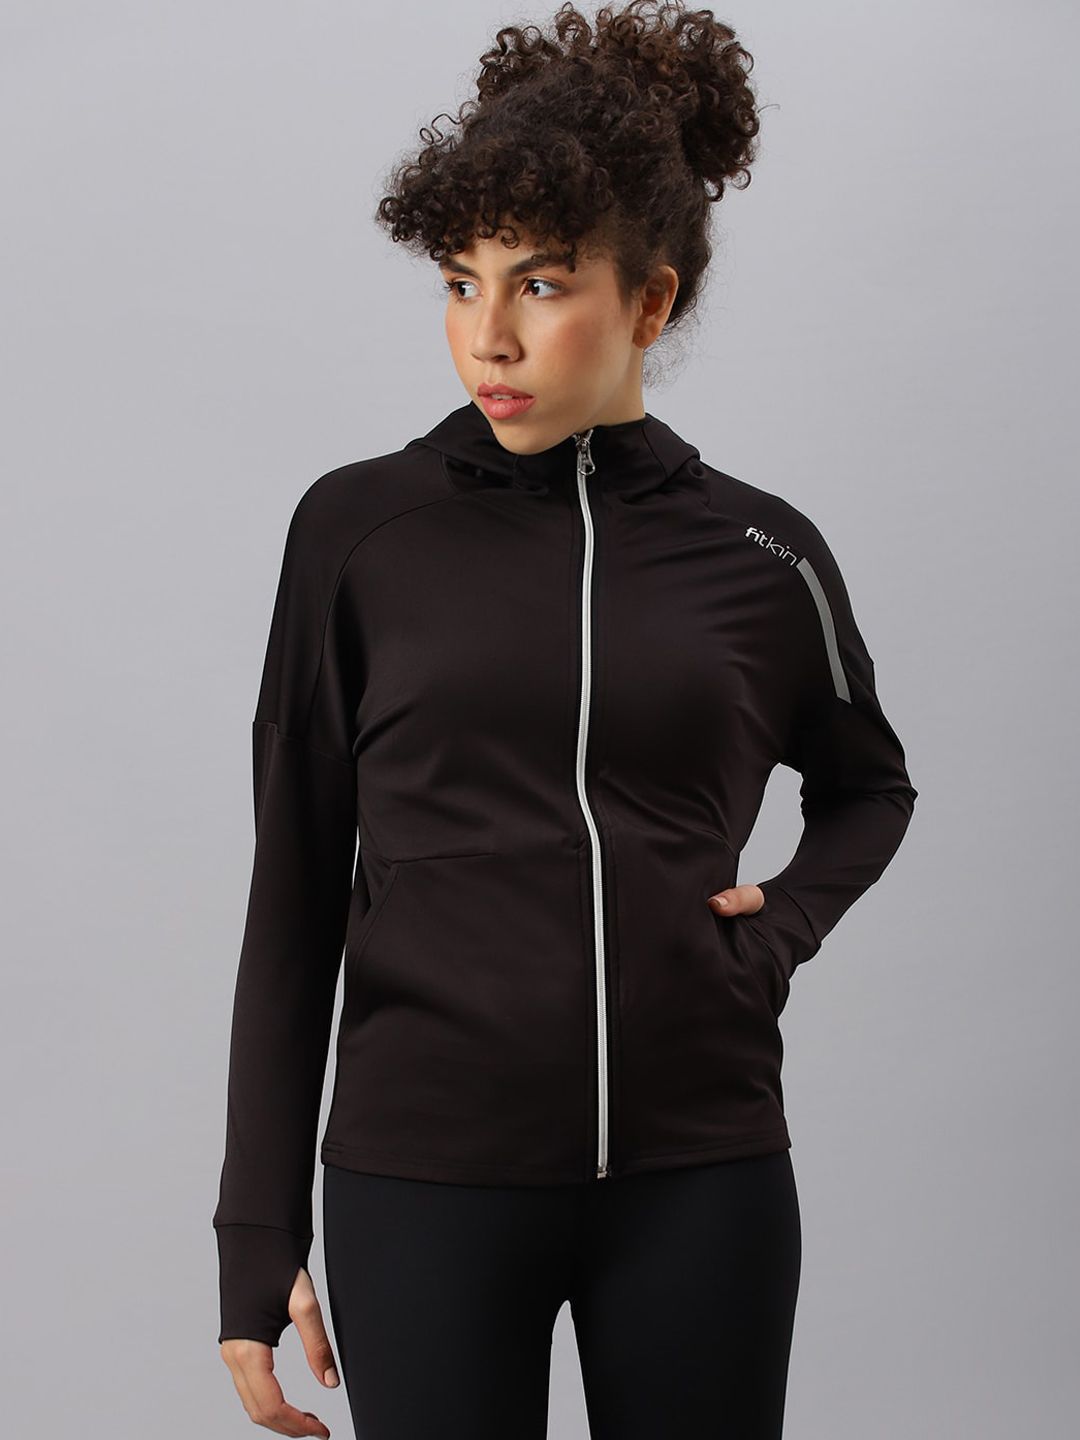 Fitkin Women Typography Lightweight Training or Gym Sporty Jacket